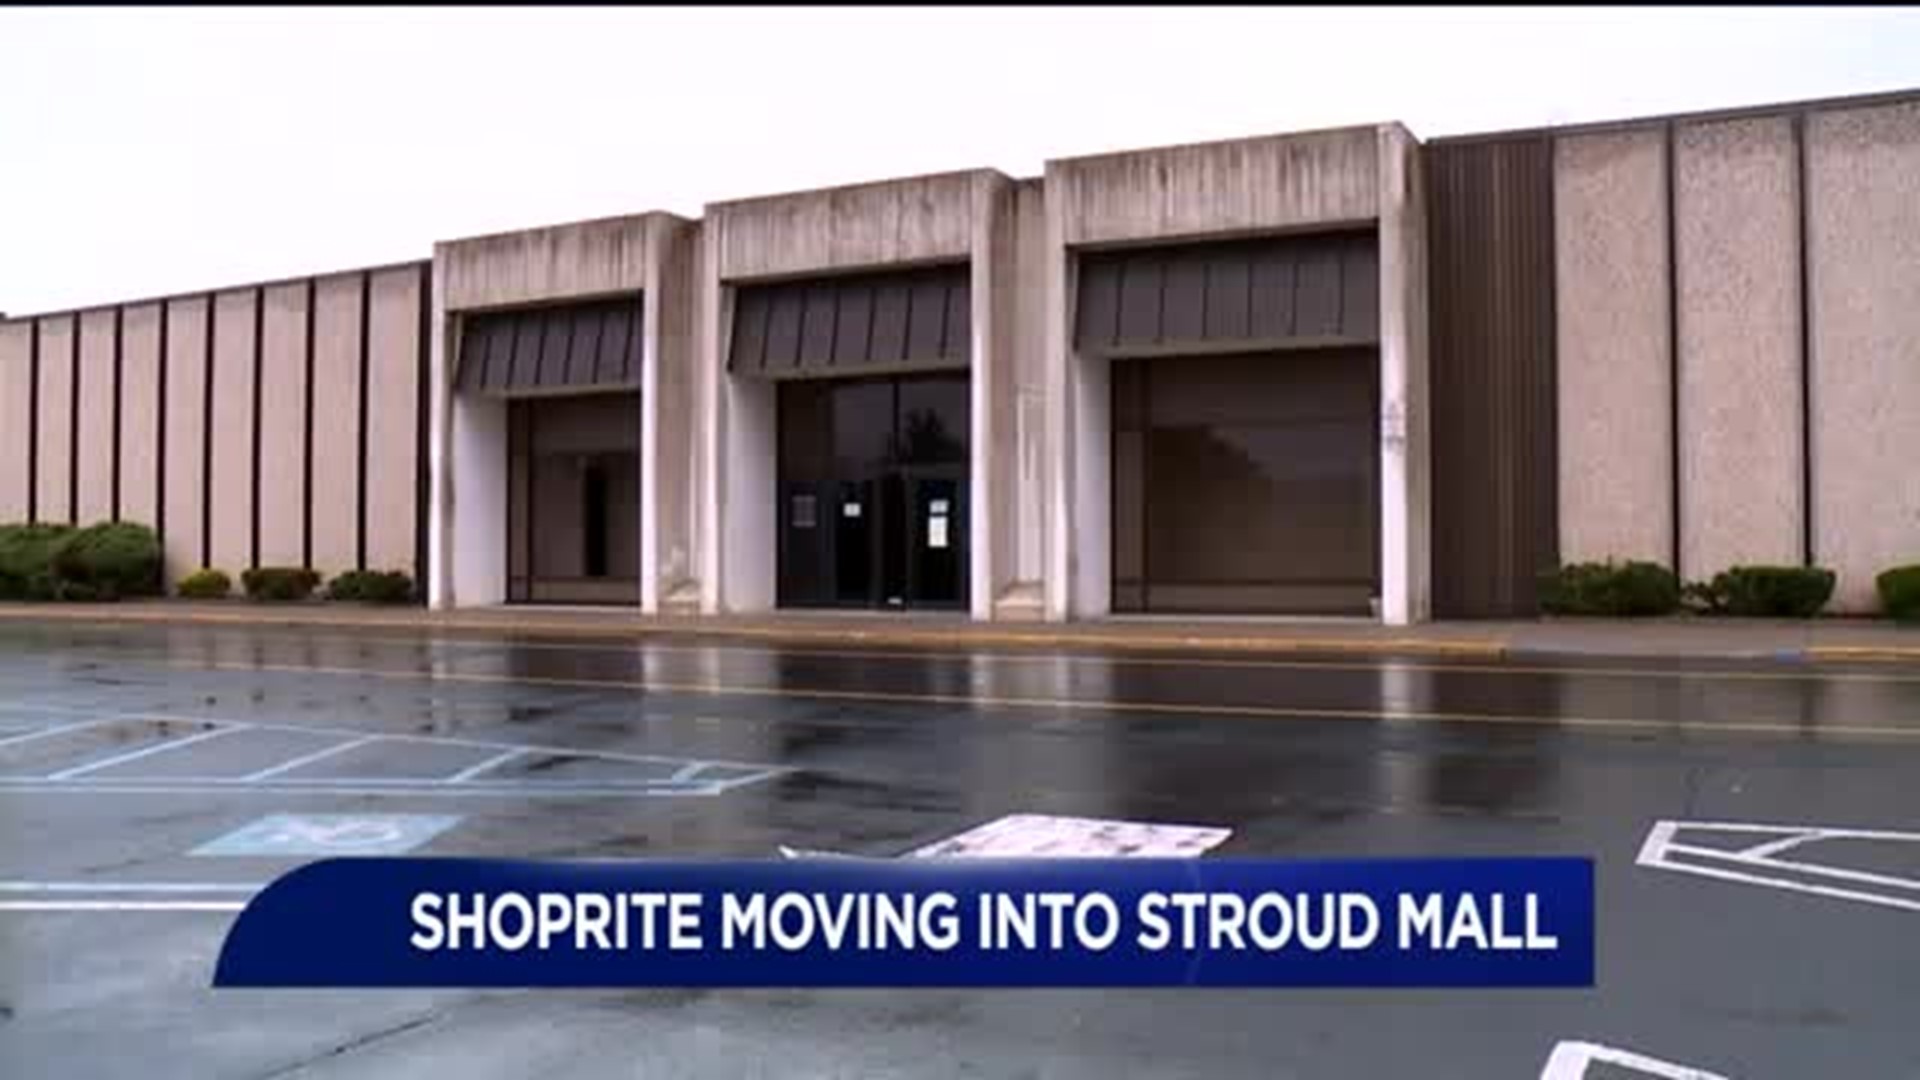 ShopRite Moving into Stroud Mall